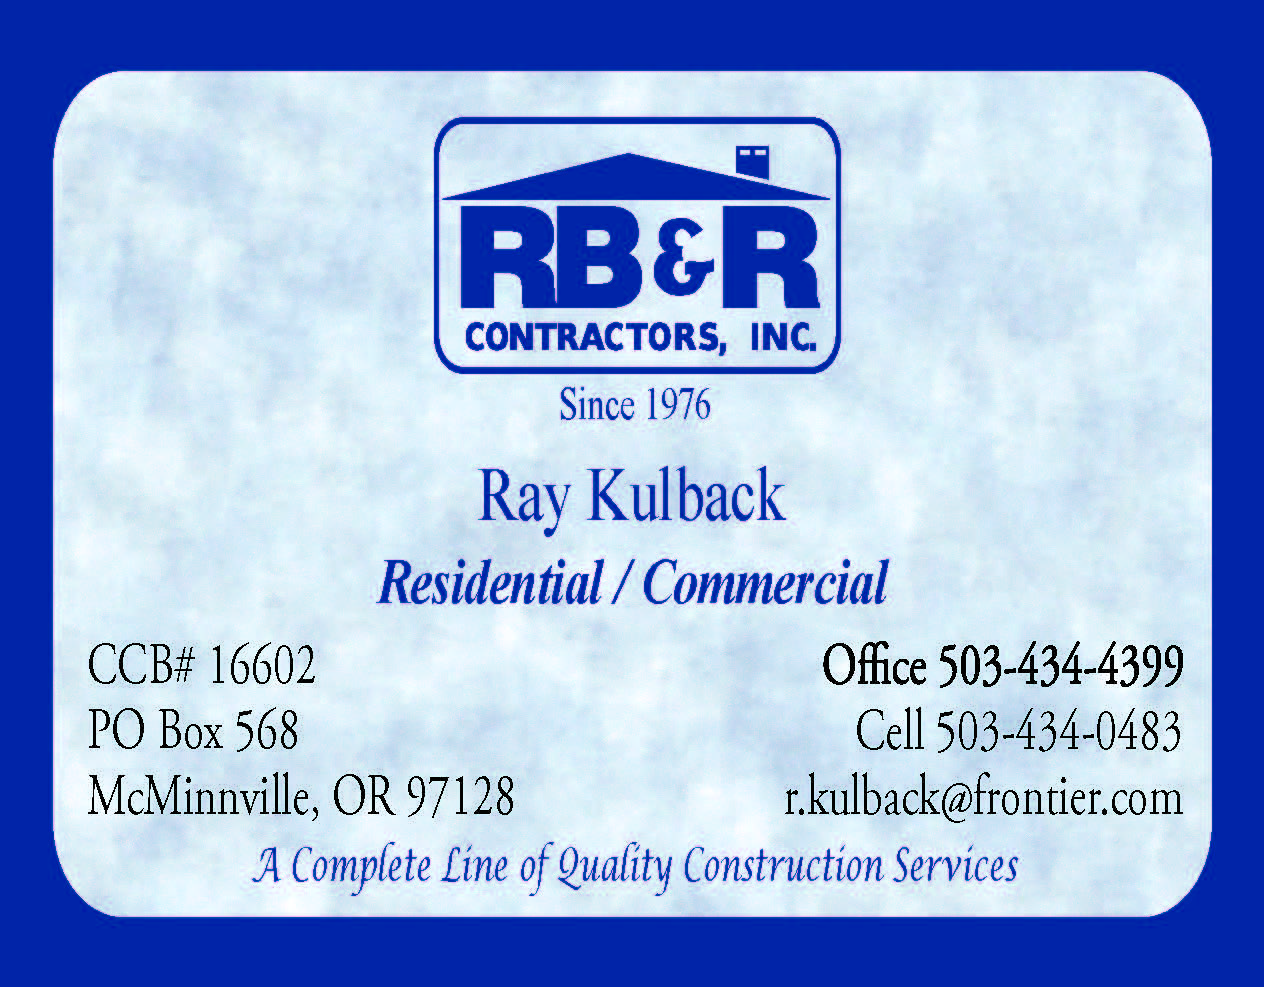 RB&R Business Card - UPDATED 6.16.jpg